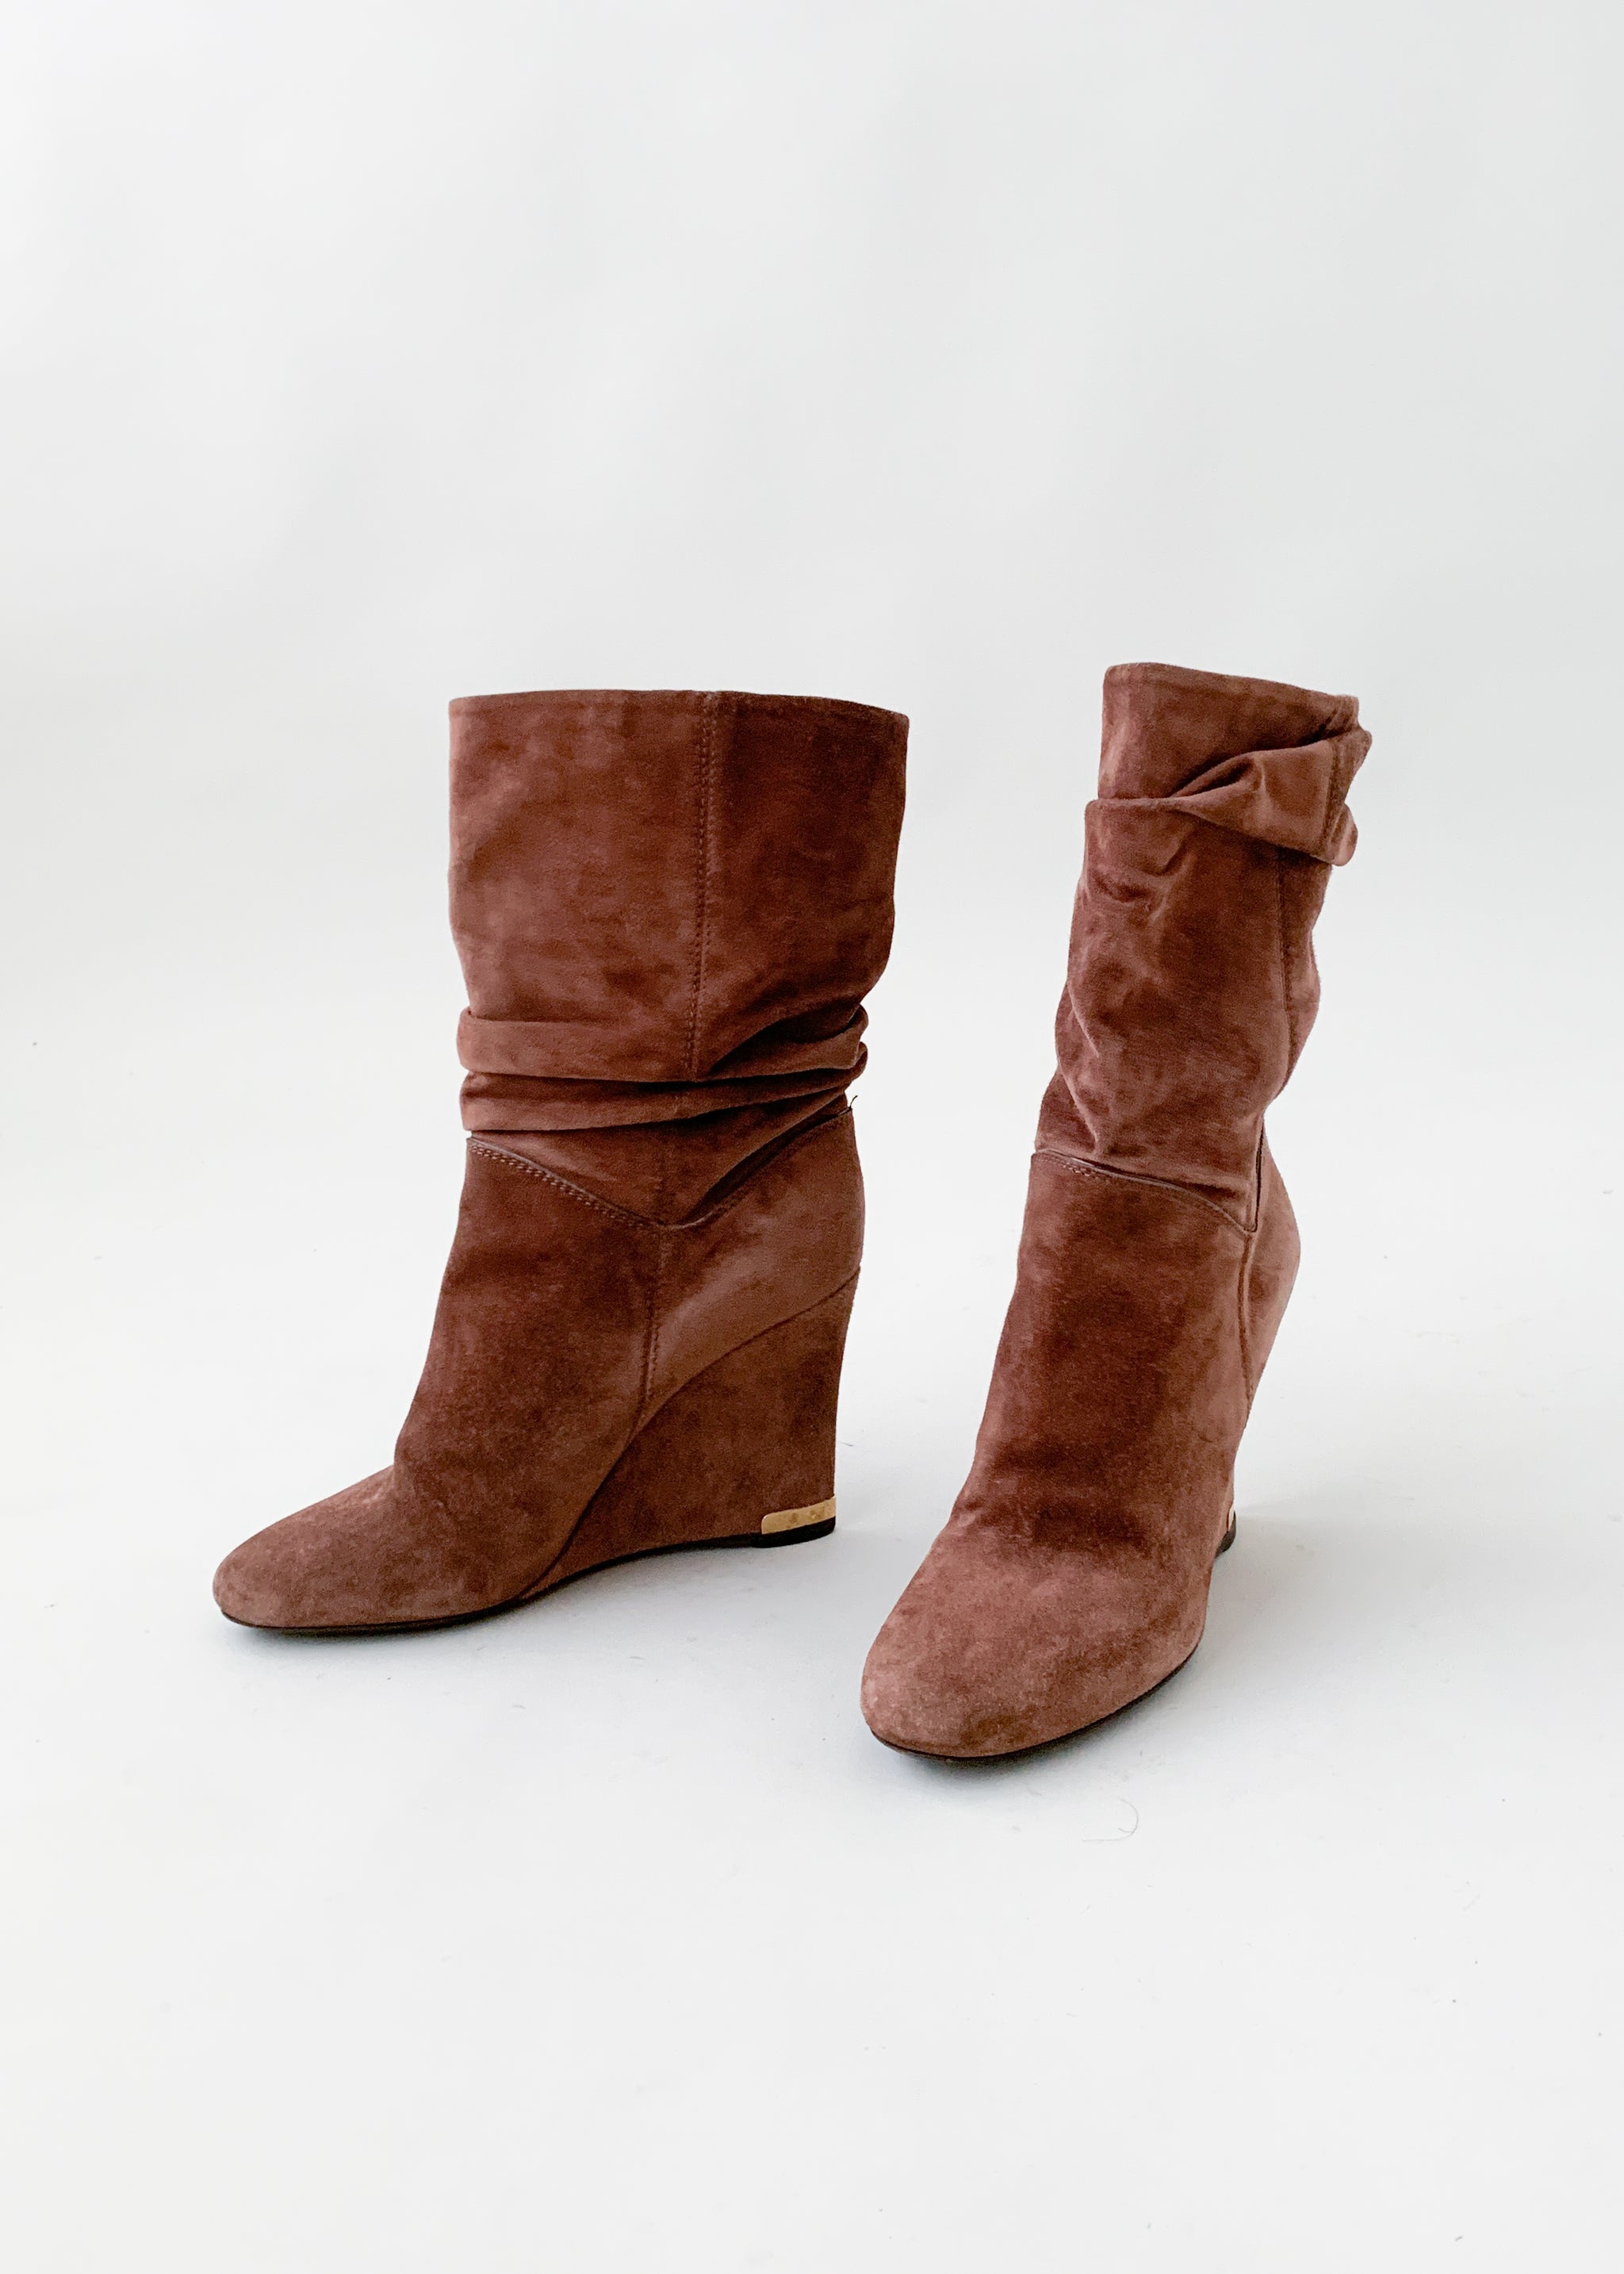 TWO PAIRS OF SUEDE HIGH BOOTS, LOUIS VUITTON, CIRCA 2010